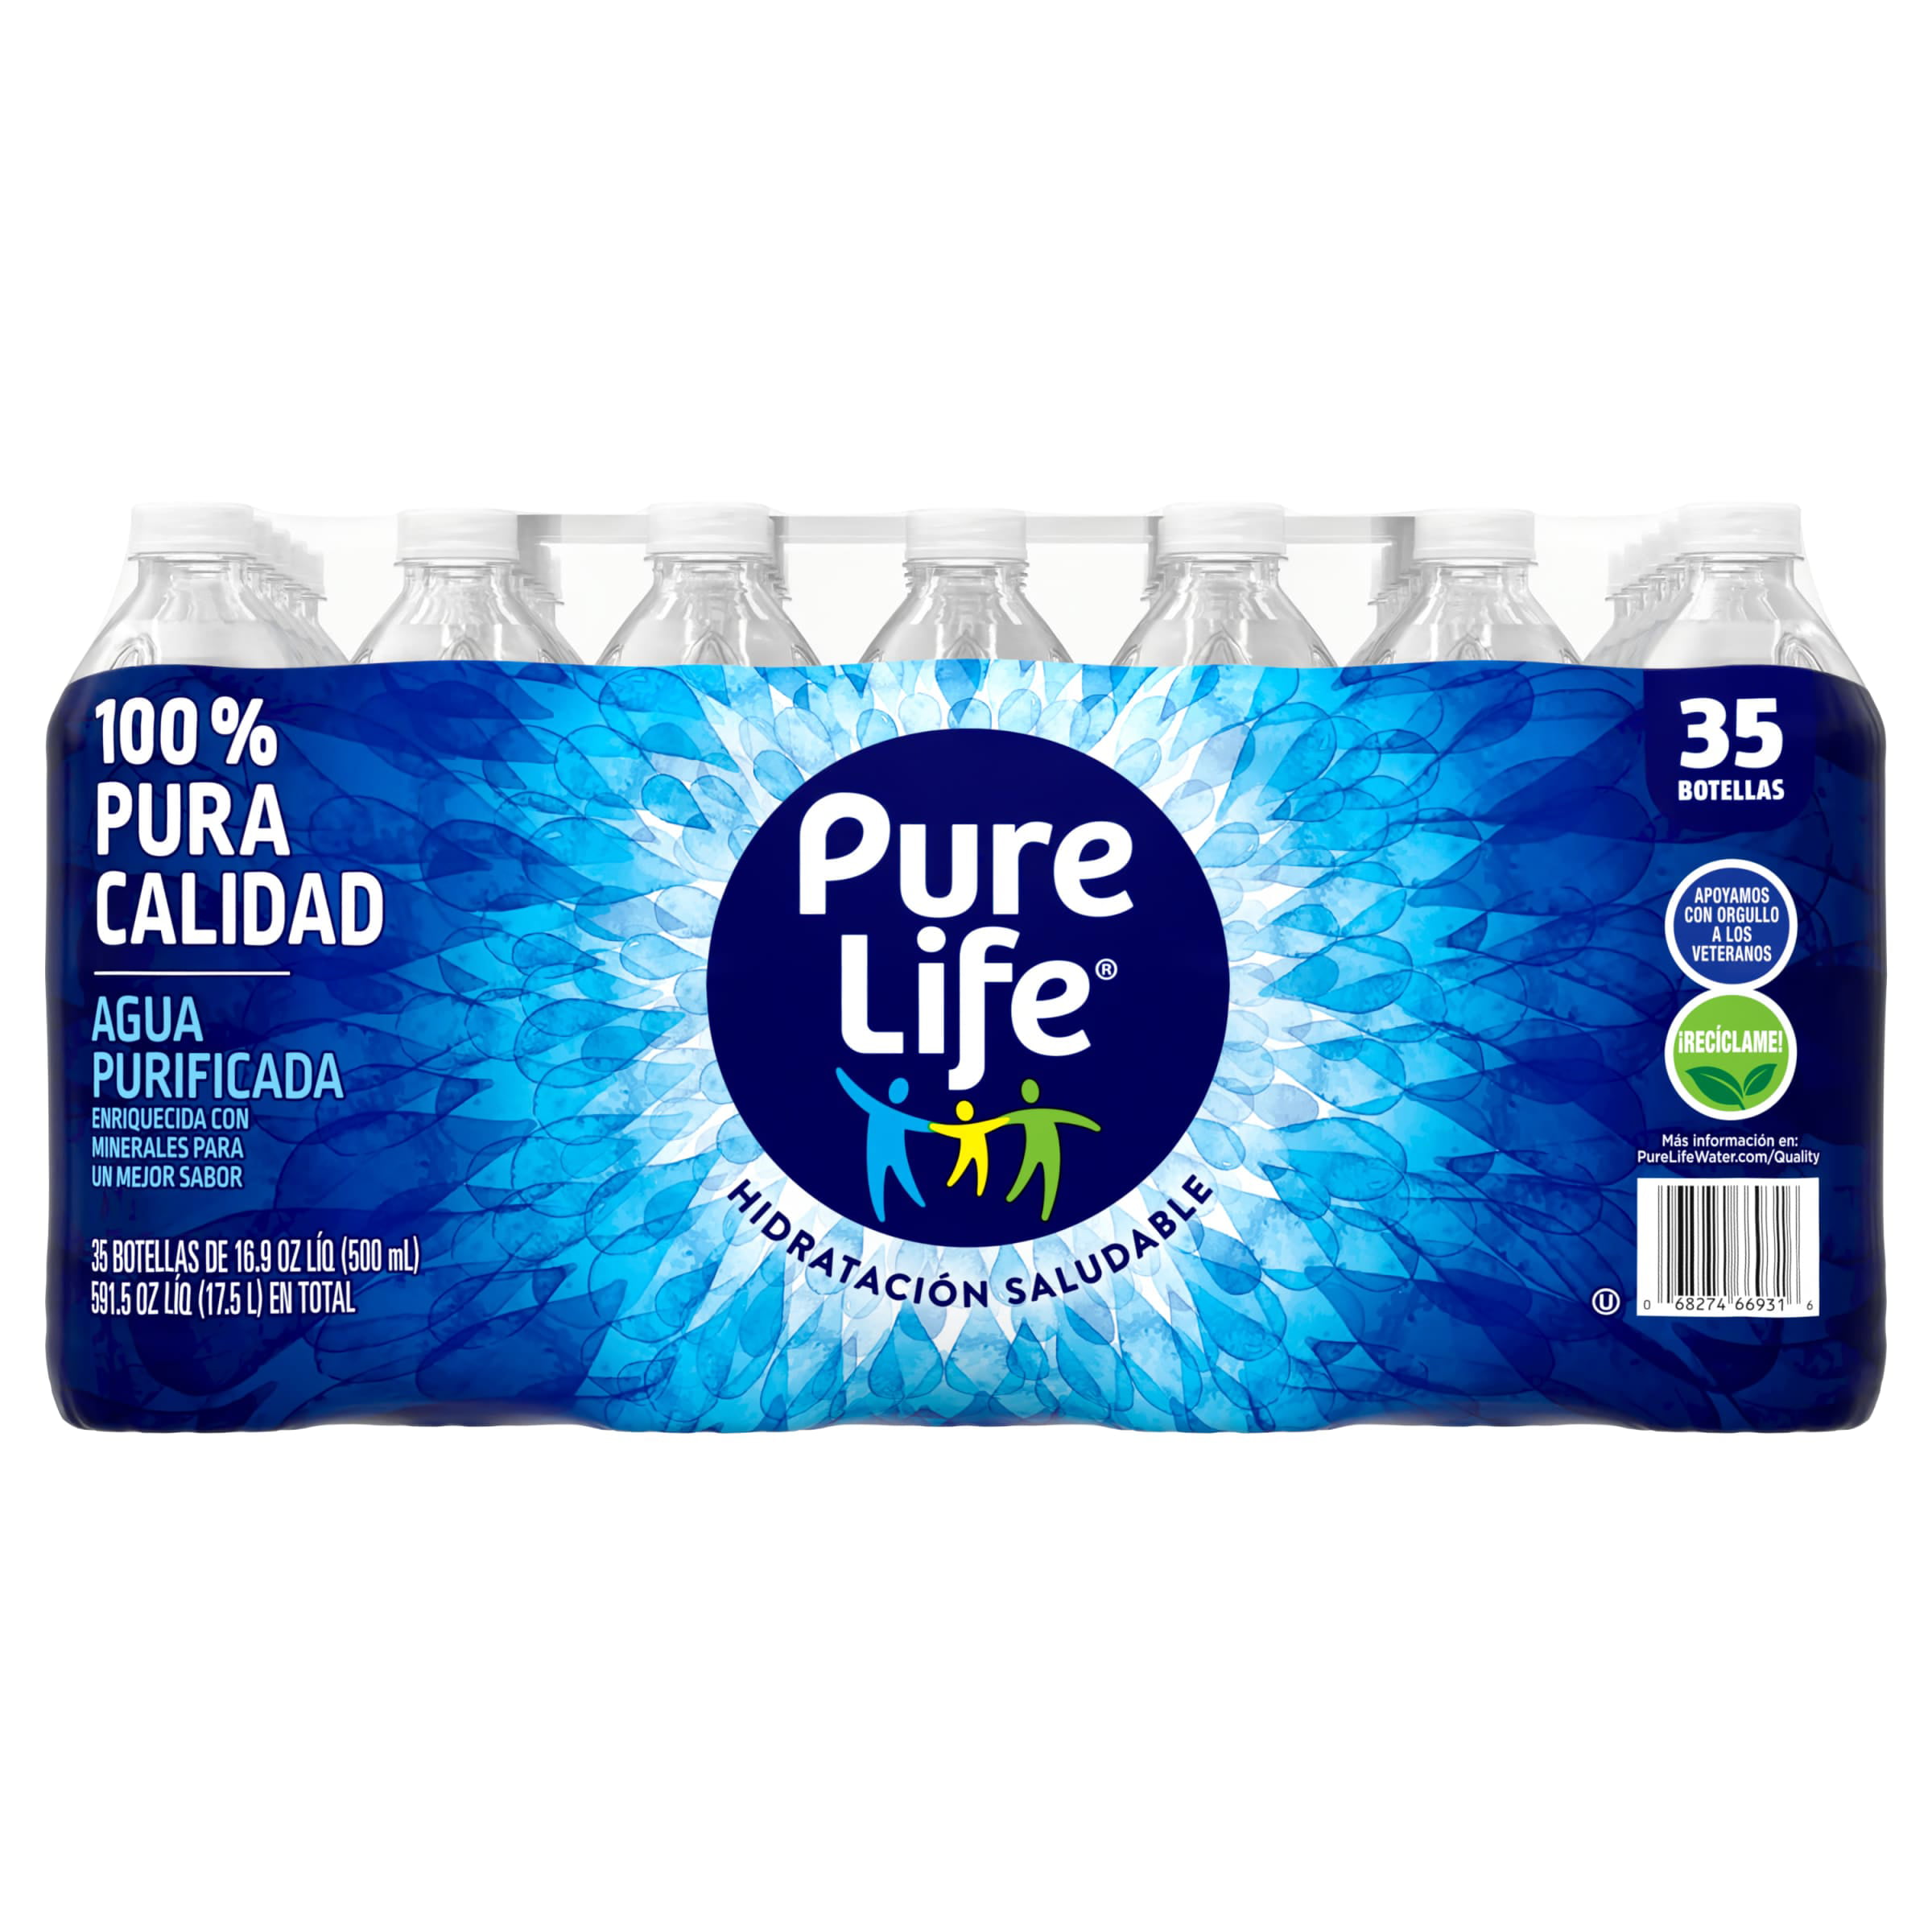 35-pack Pure Life purified water bottles